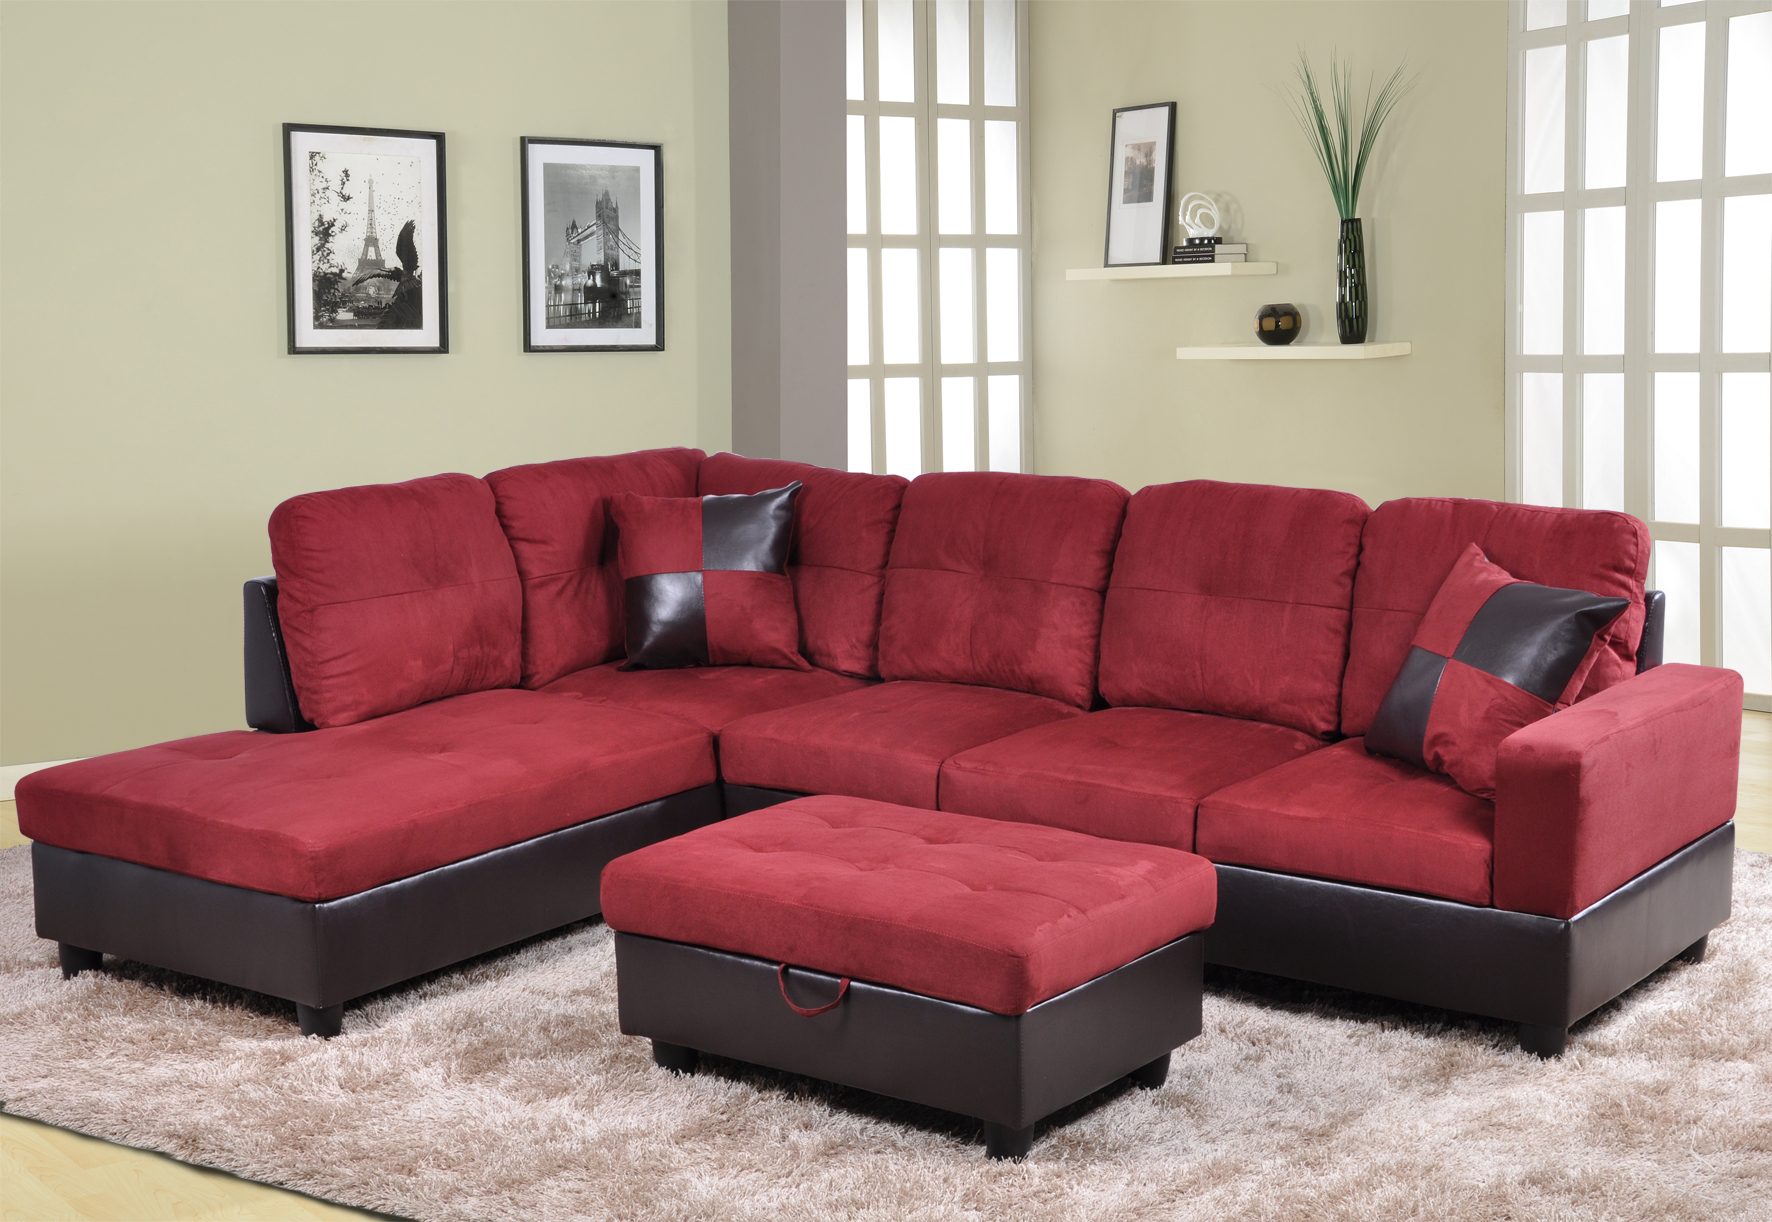 AYCP Furniture 3 Pieces L - Shape Sectional Sofa Set, Left Hand Facing Chaise, Microfiber & Faux Leather Upholstery Material, Red Color, More Colors & Styles Available - image 1 of 1